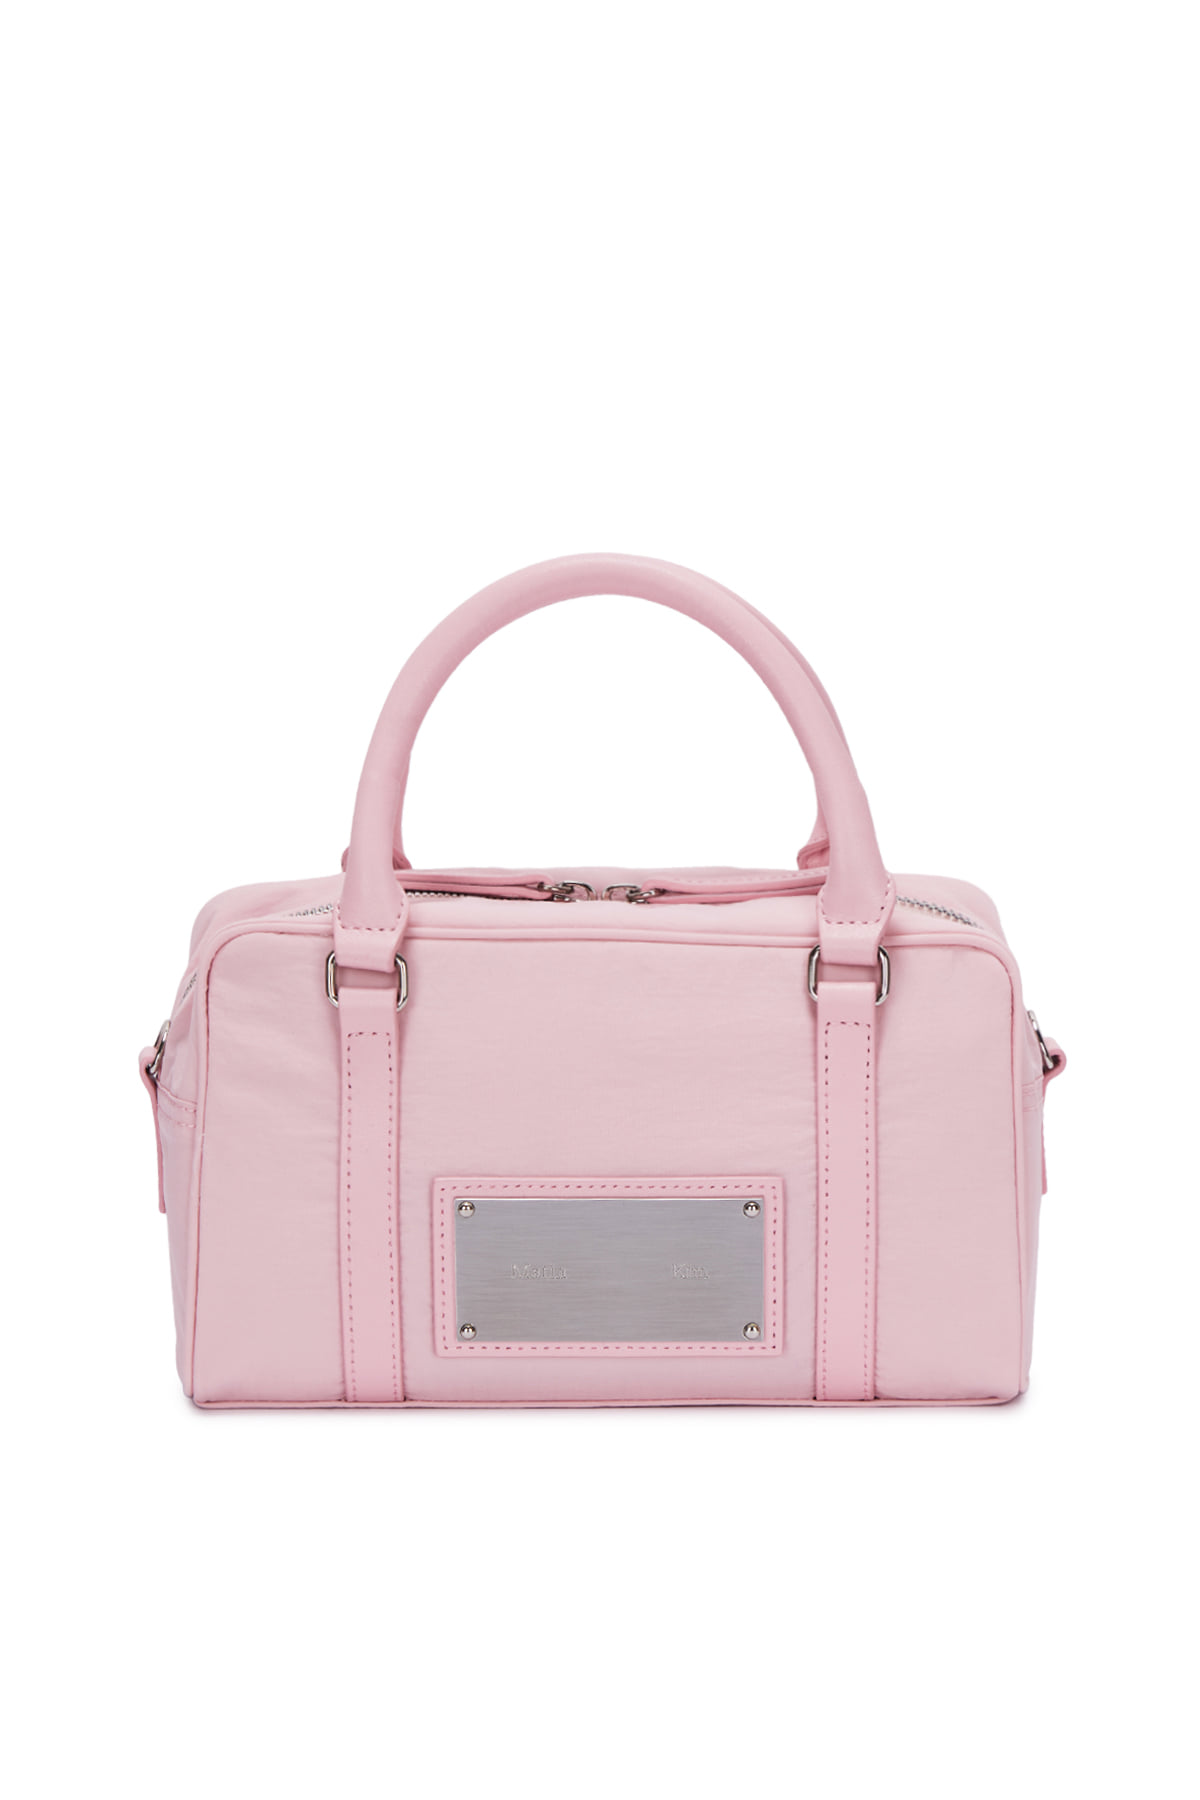 BABY SPORTY TOTE BAG IN PINK